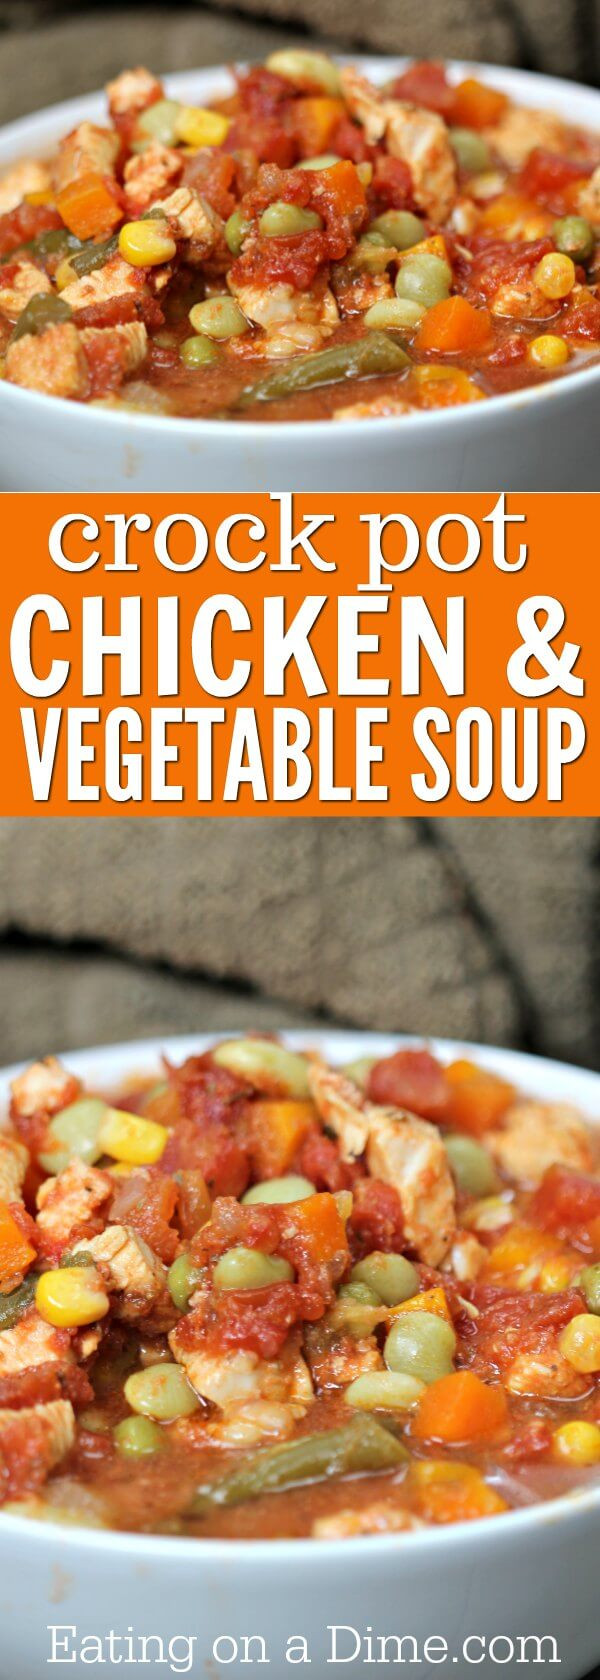 Crockpot Chicken And Vegetable Soup
 Crockpot Chicken Ve able Soup Recipe Slow Cooker